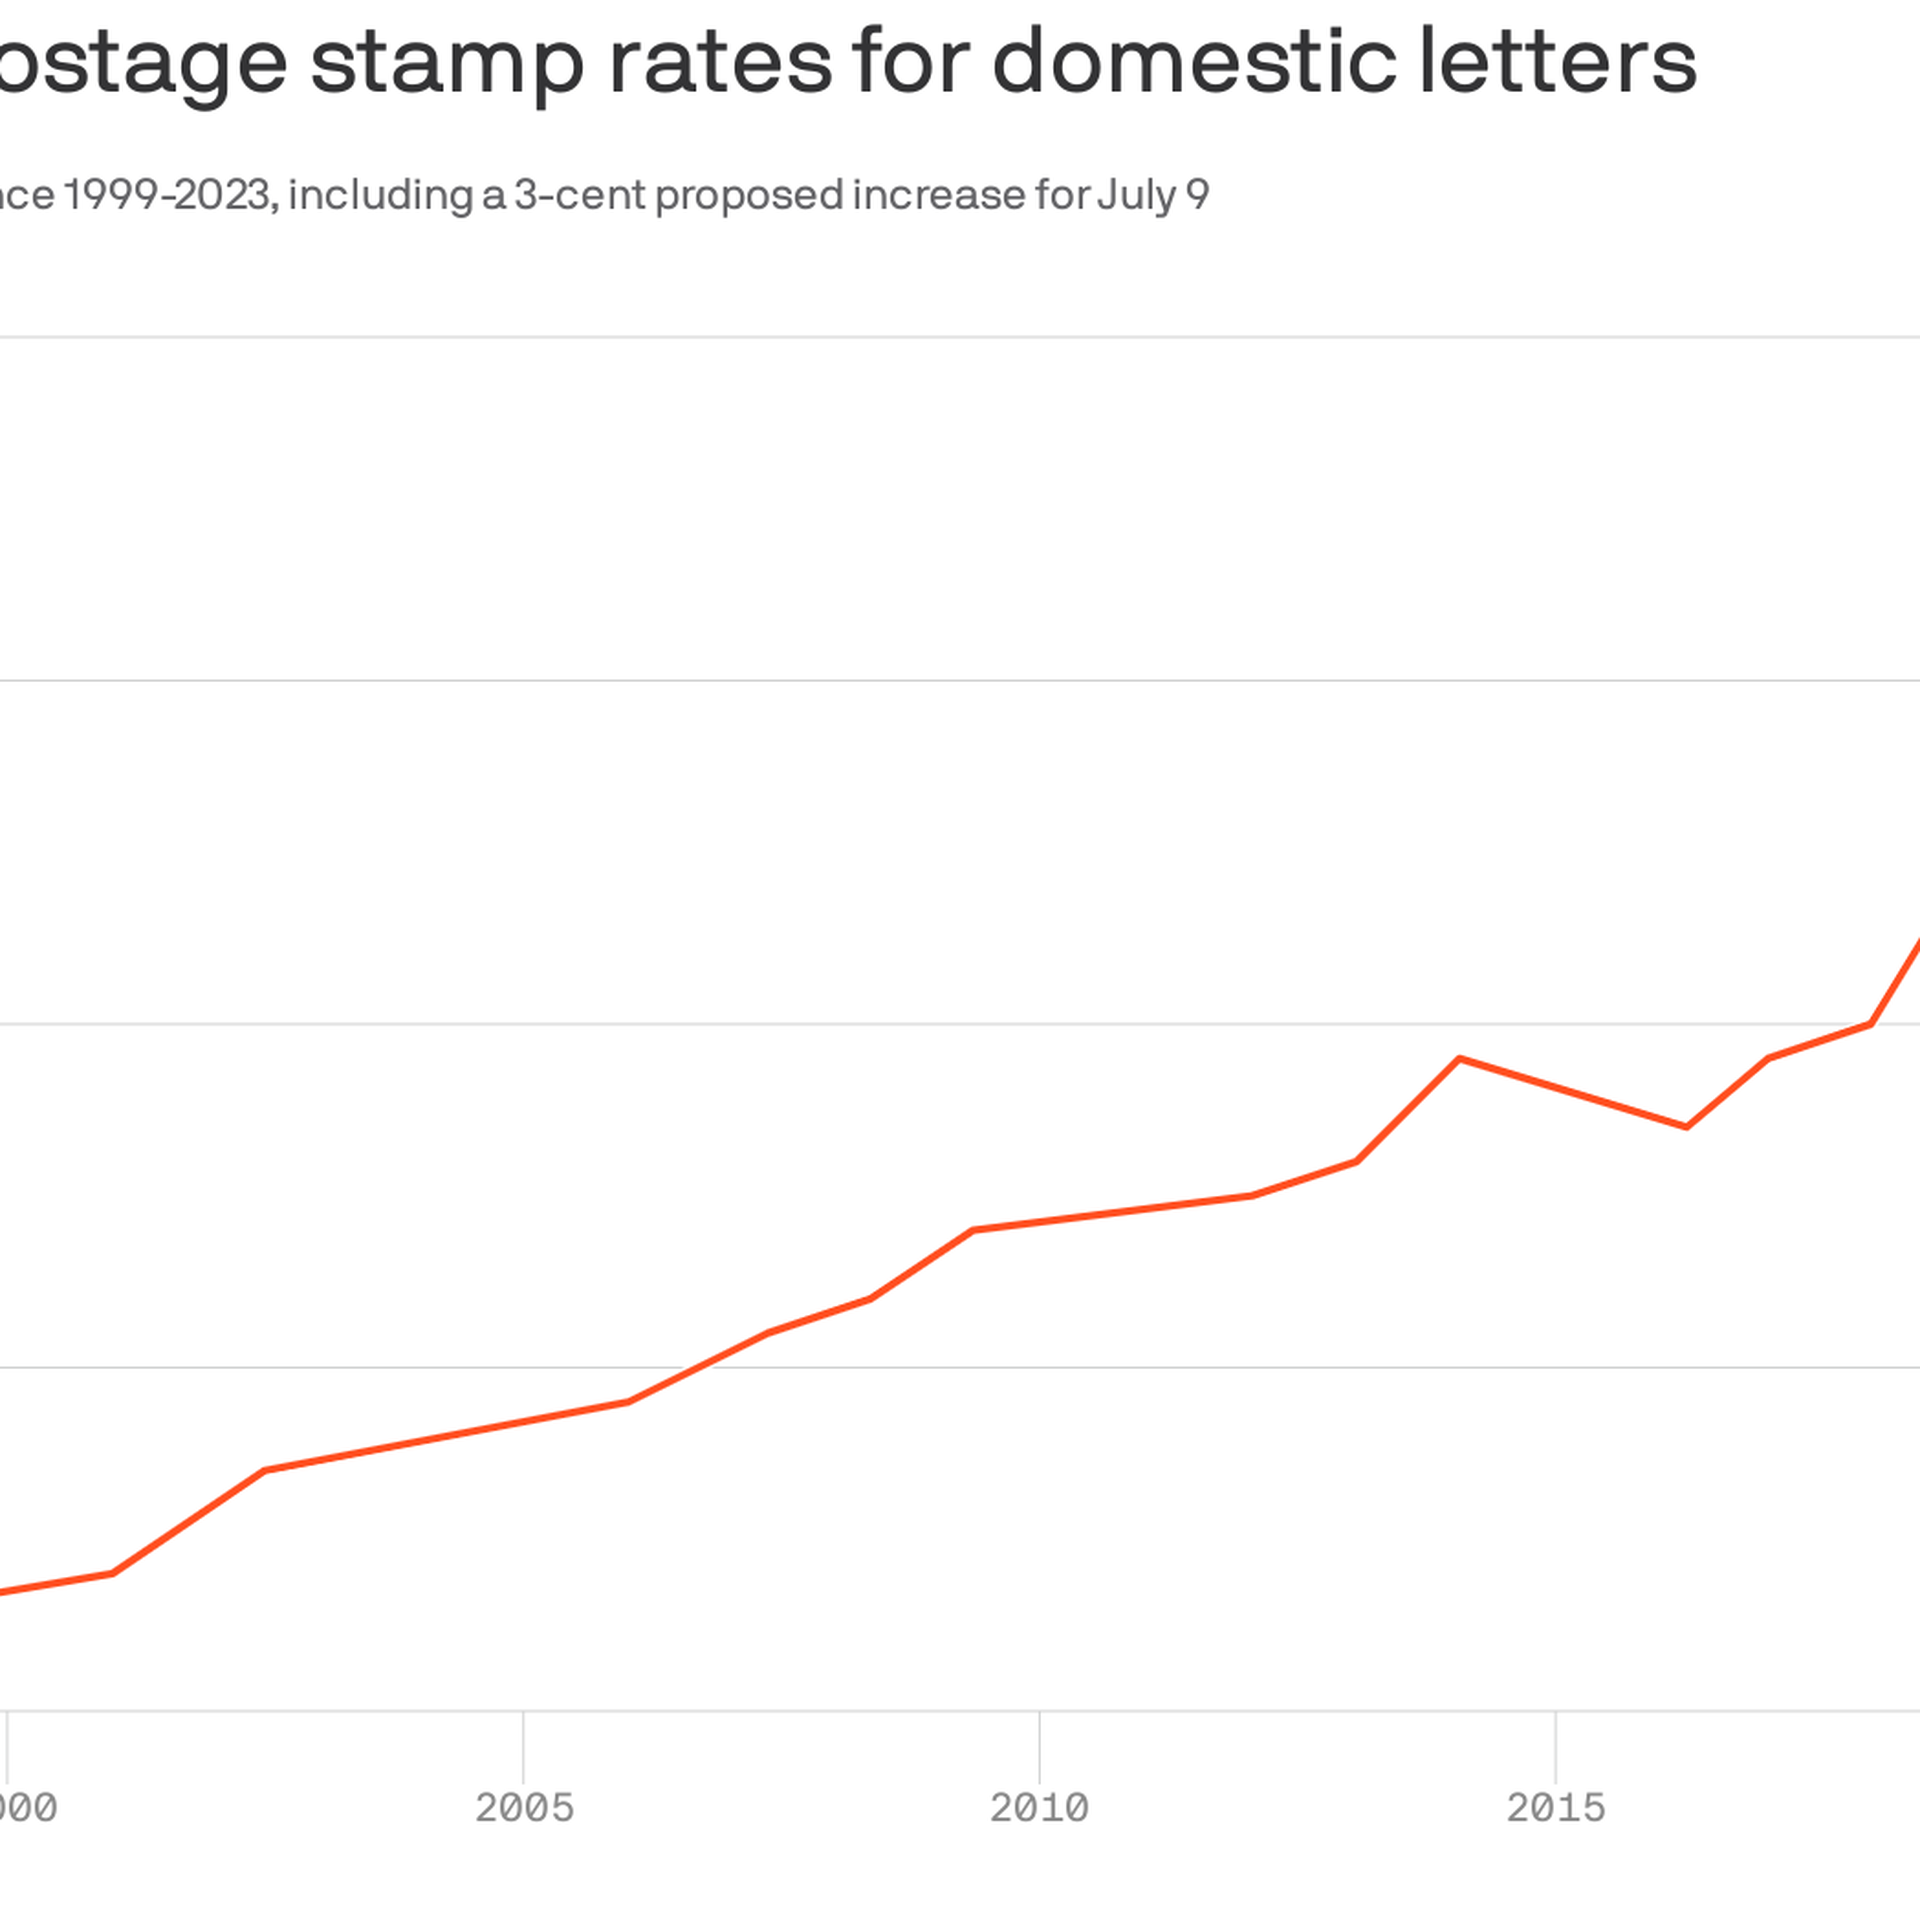 Stamp Prices Are Going Up to 66 Cents Due to Inflation: USPS